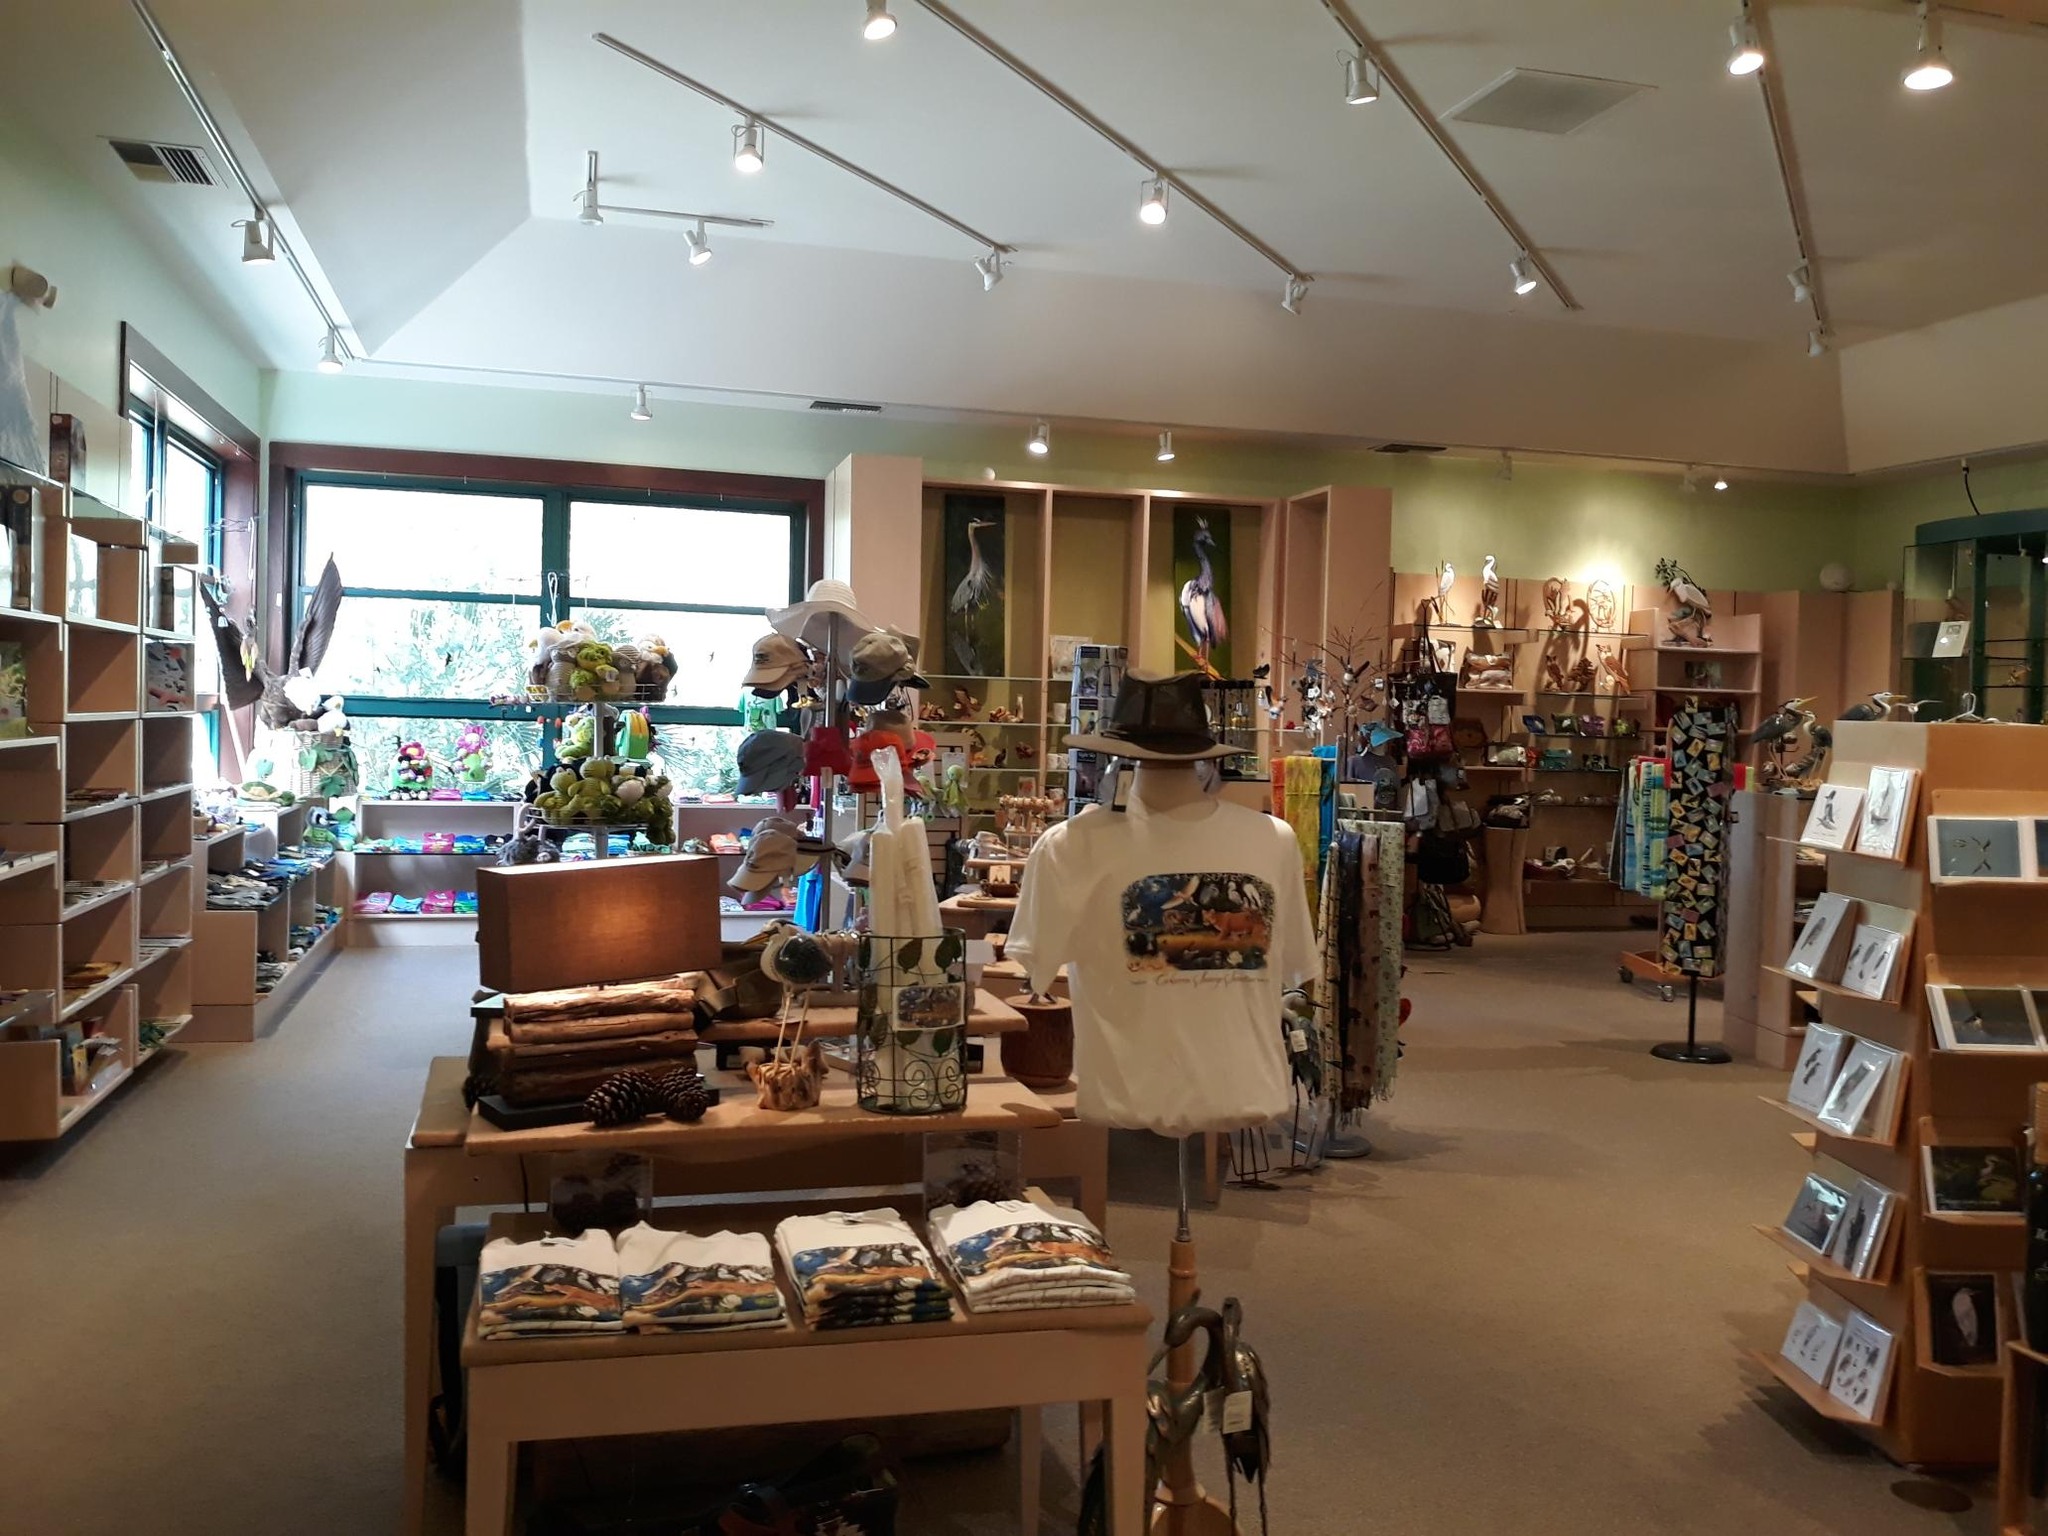 view of merchandise and the store interior